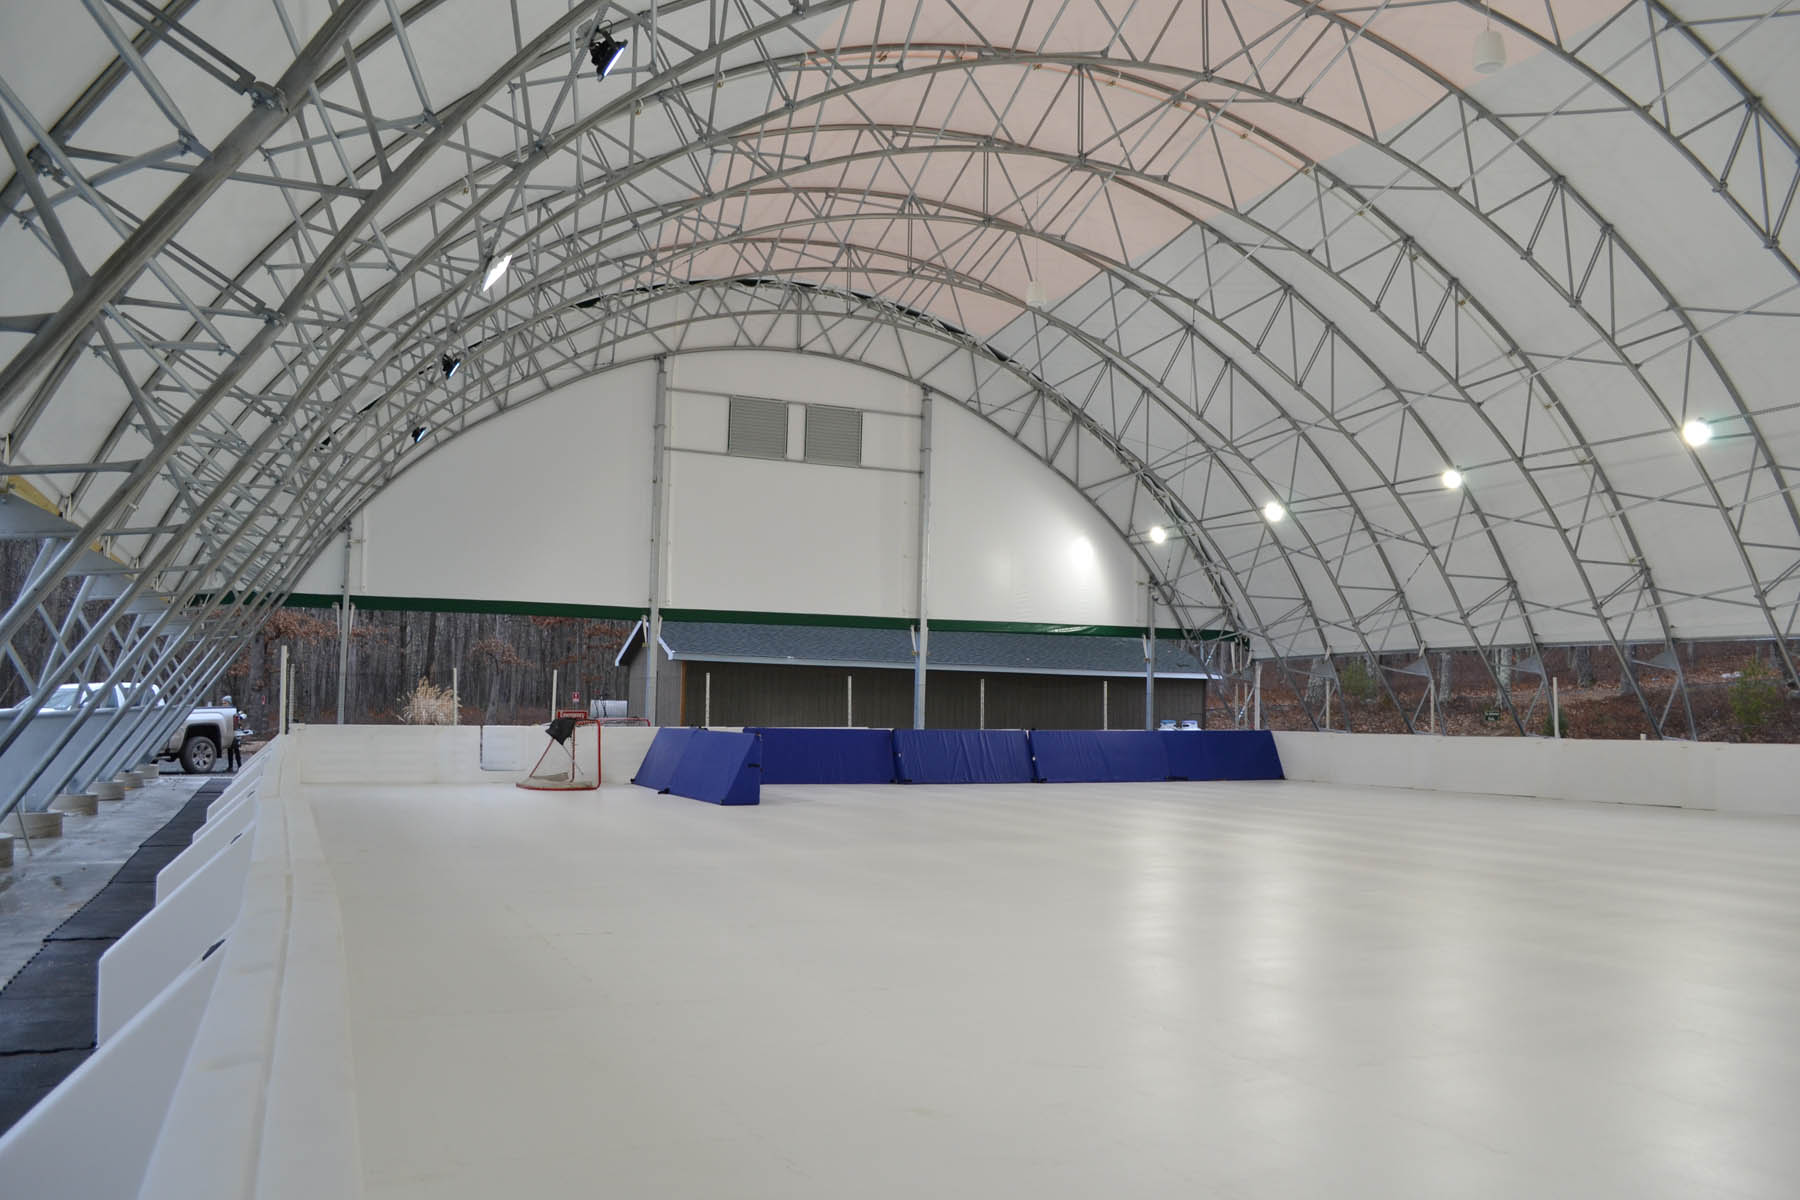 Covered ice rink.